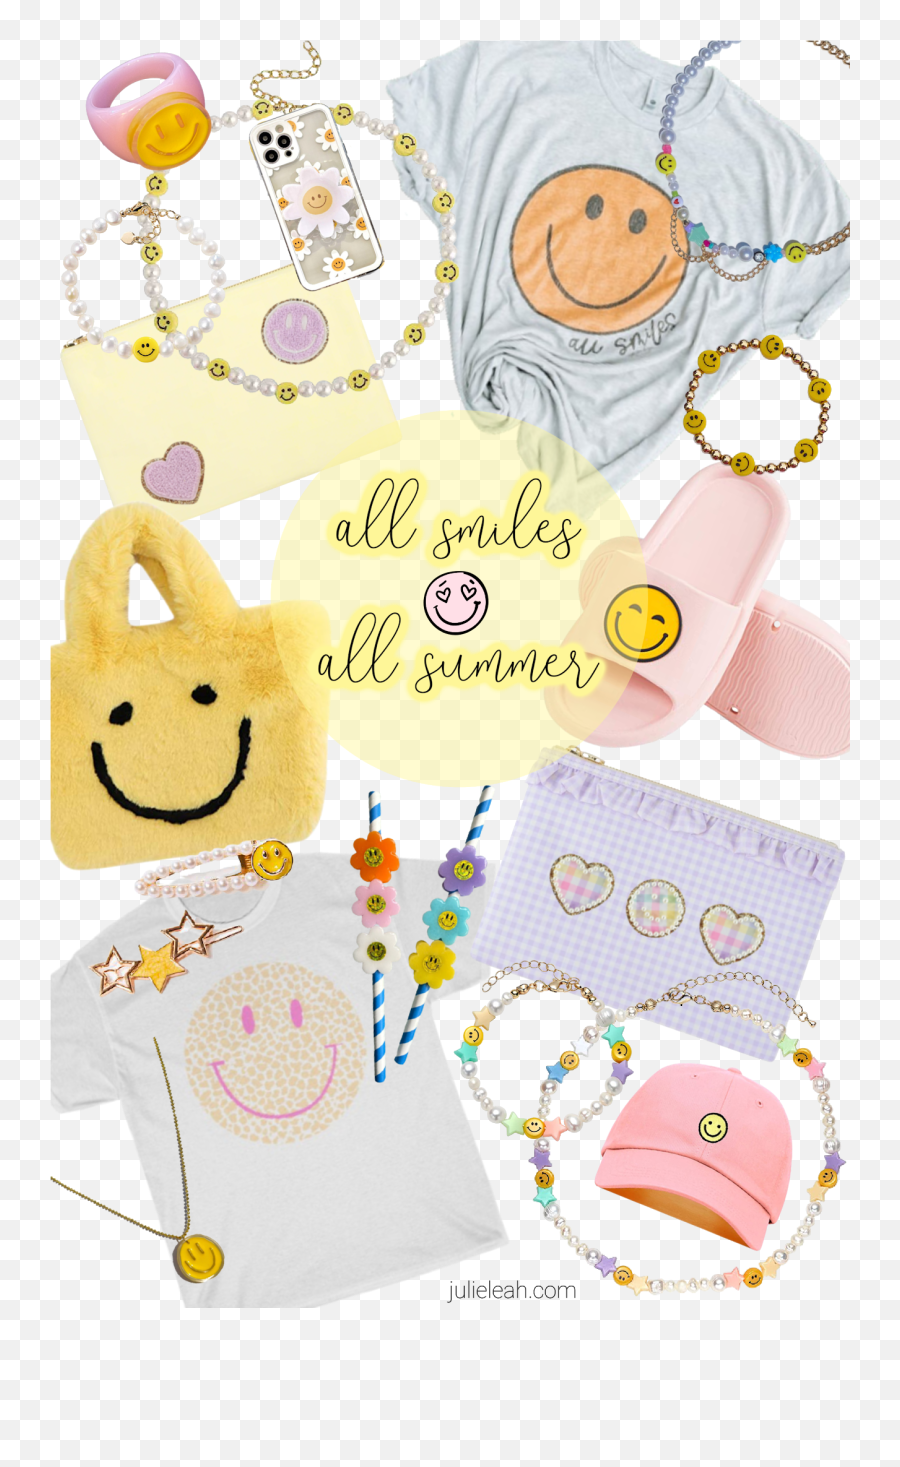 All Smiles All Summer Julie Leah A Southern Life And Emoji,Emoticon Beads